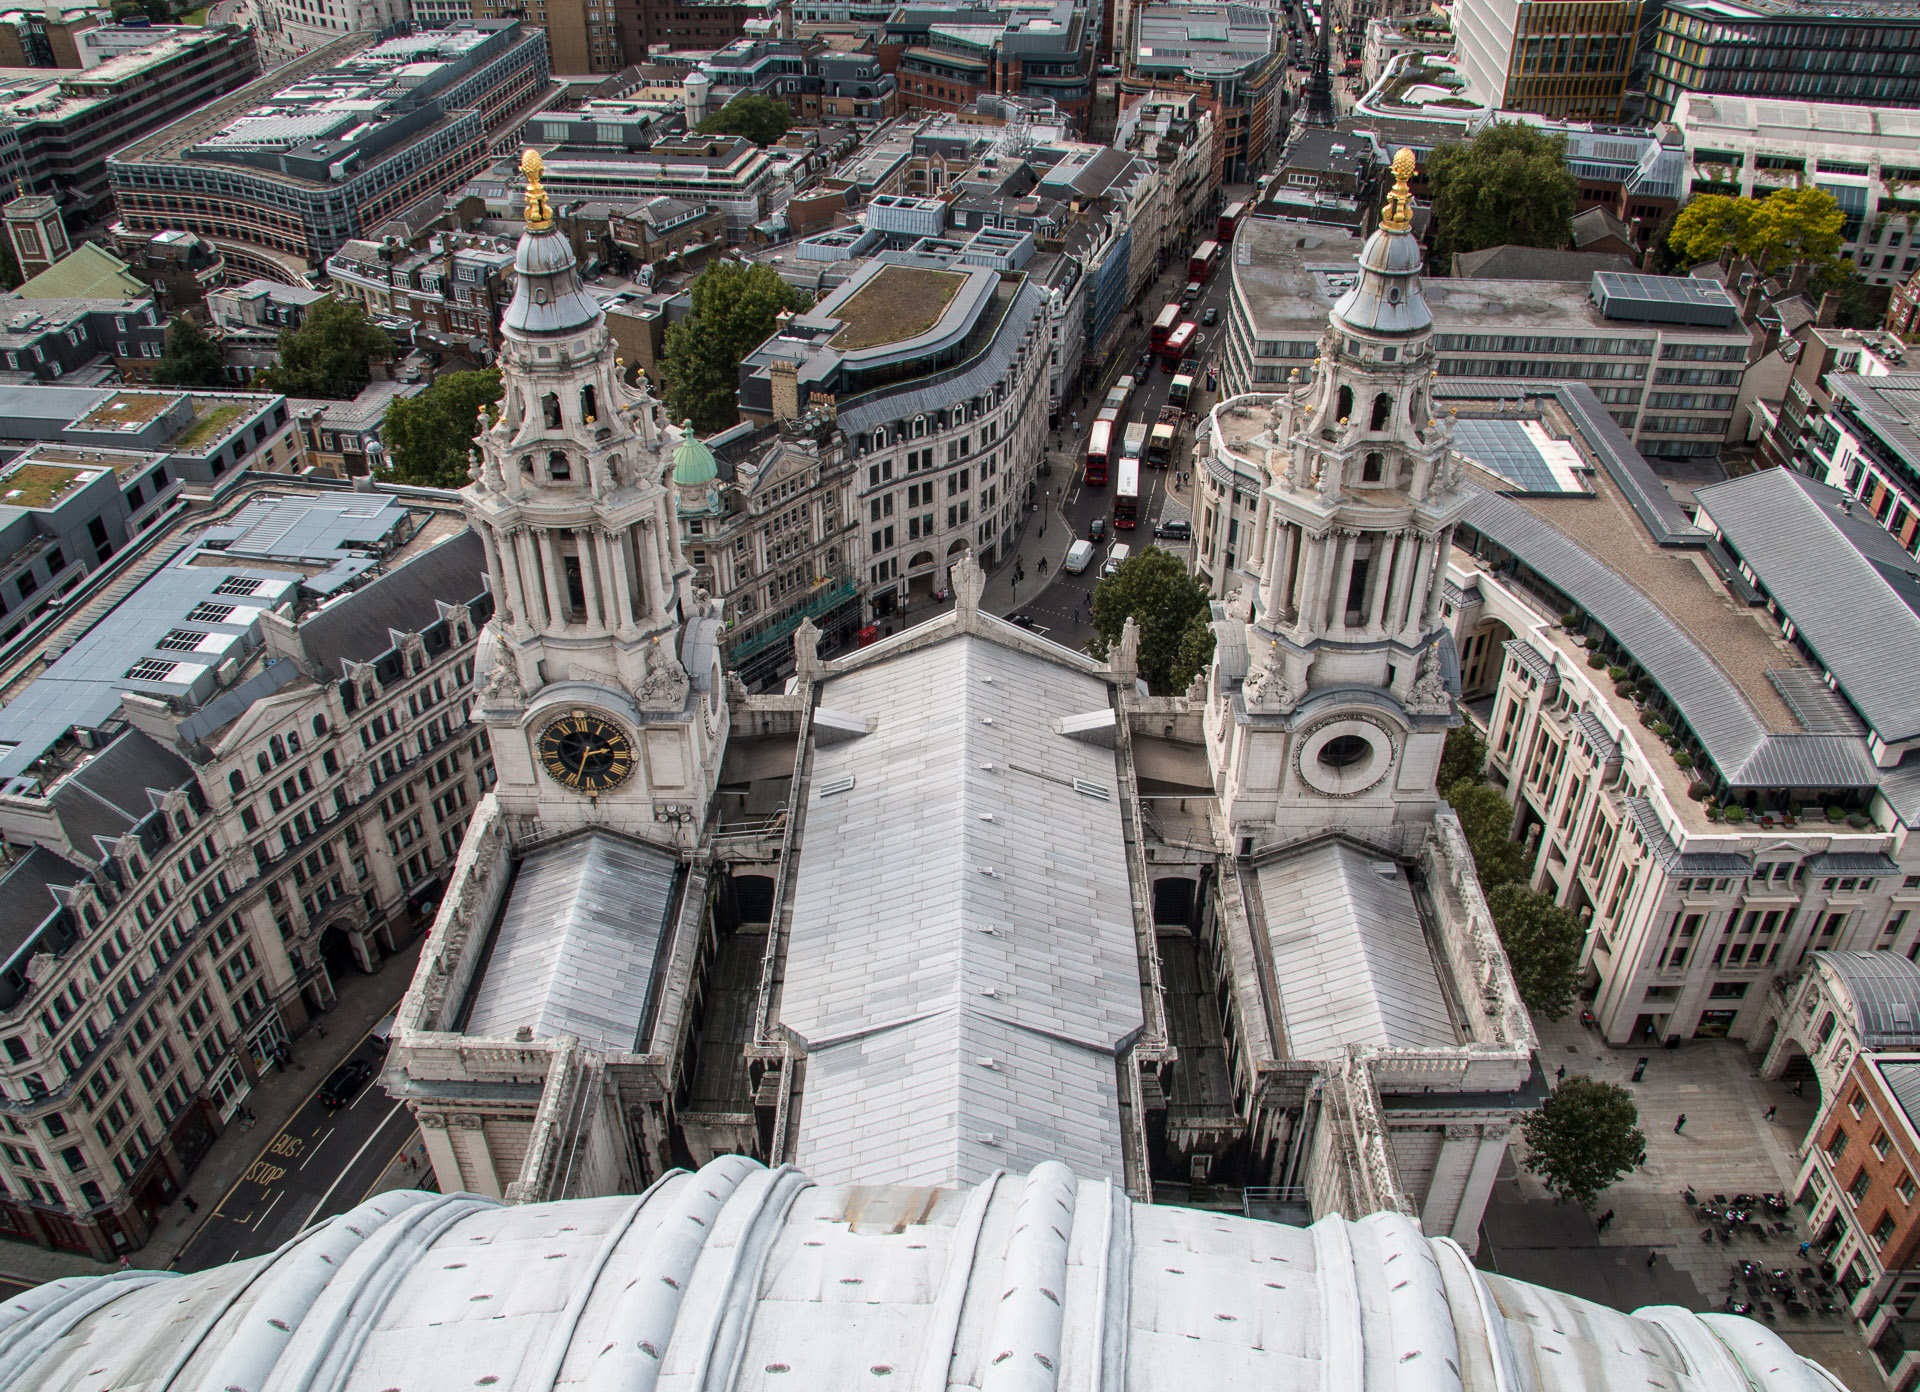 View from the Golden Gallery at the top of the cupola of St. Paul's Cathedral in London